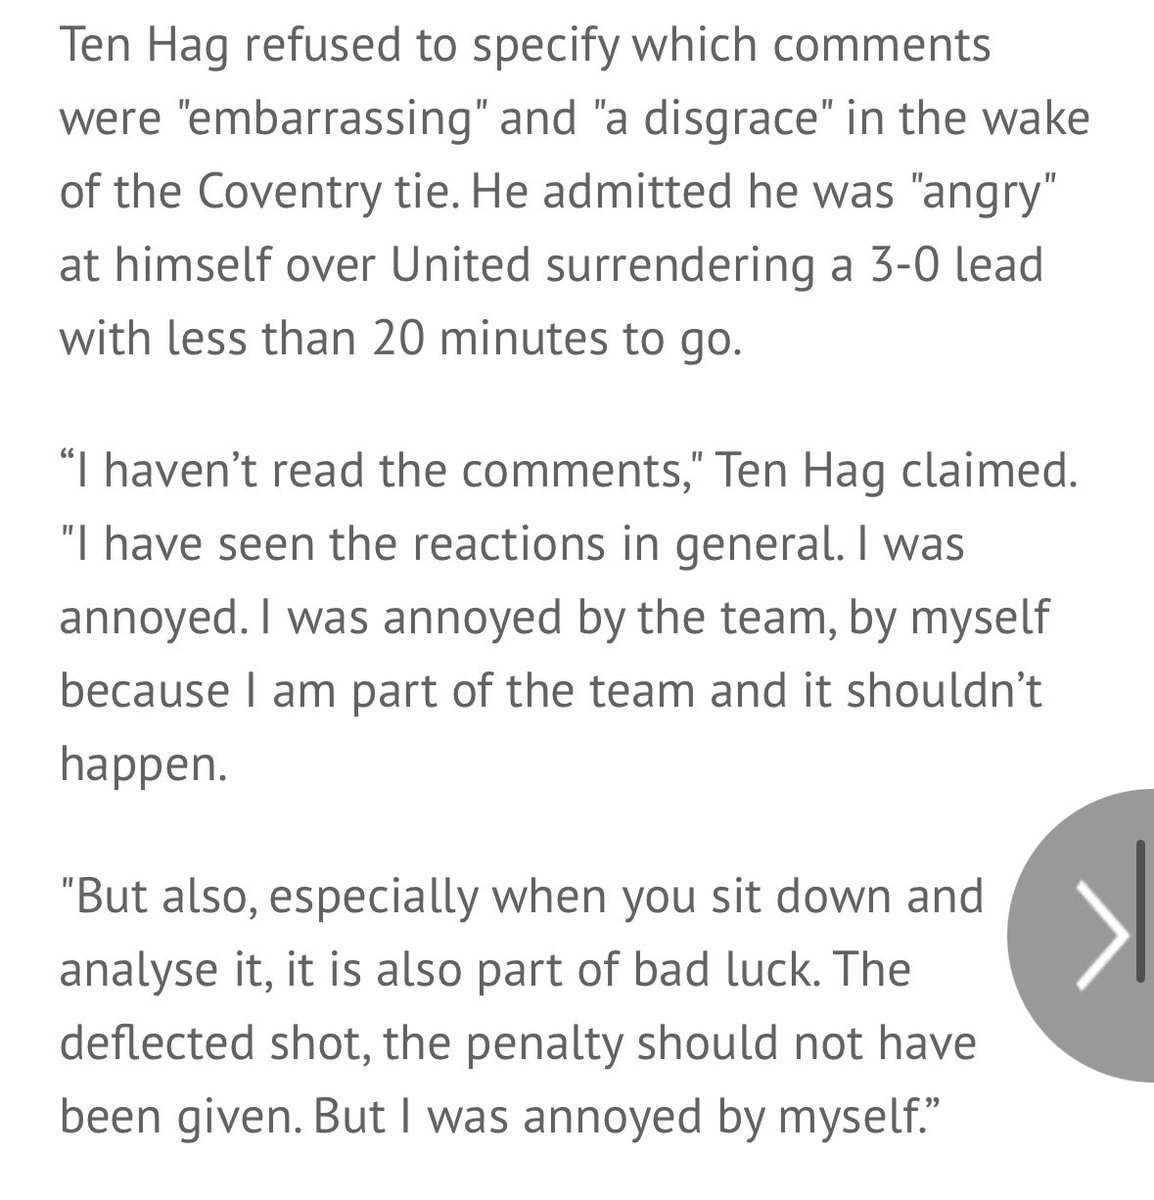 I said the #MUFC owners, directors, coaching staff, players, medical and more should all be accountable for poor results. Yet because I mentioned the manager I’m a “traitor” 🤣 Even Ten Hag said he was angry with himself AND the players after Coventry. Everyone’s accountable 🤷‍♂️